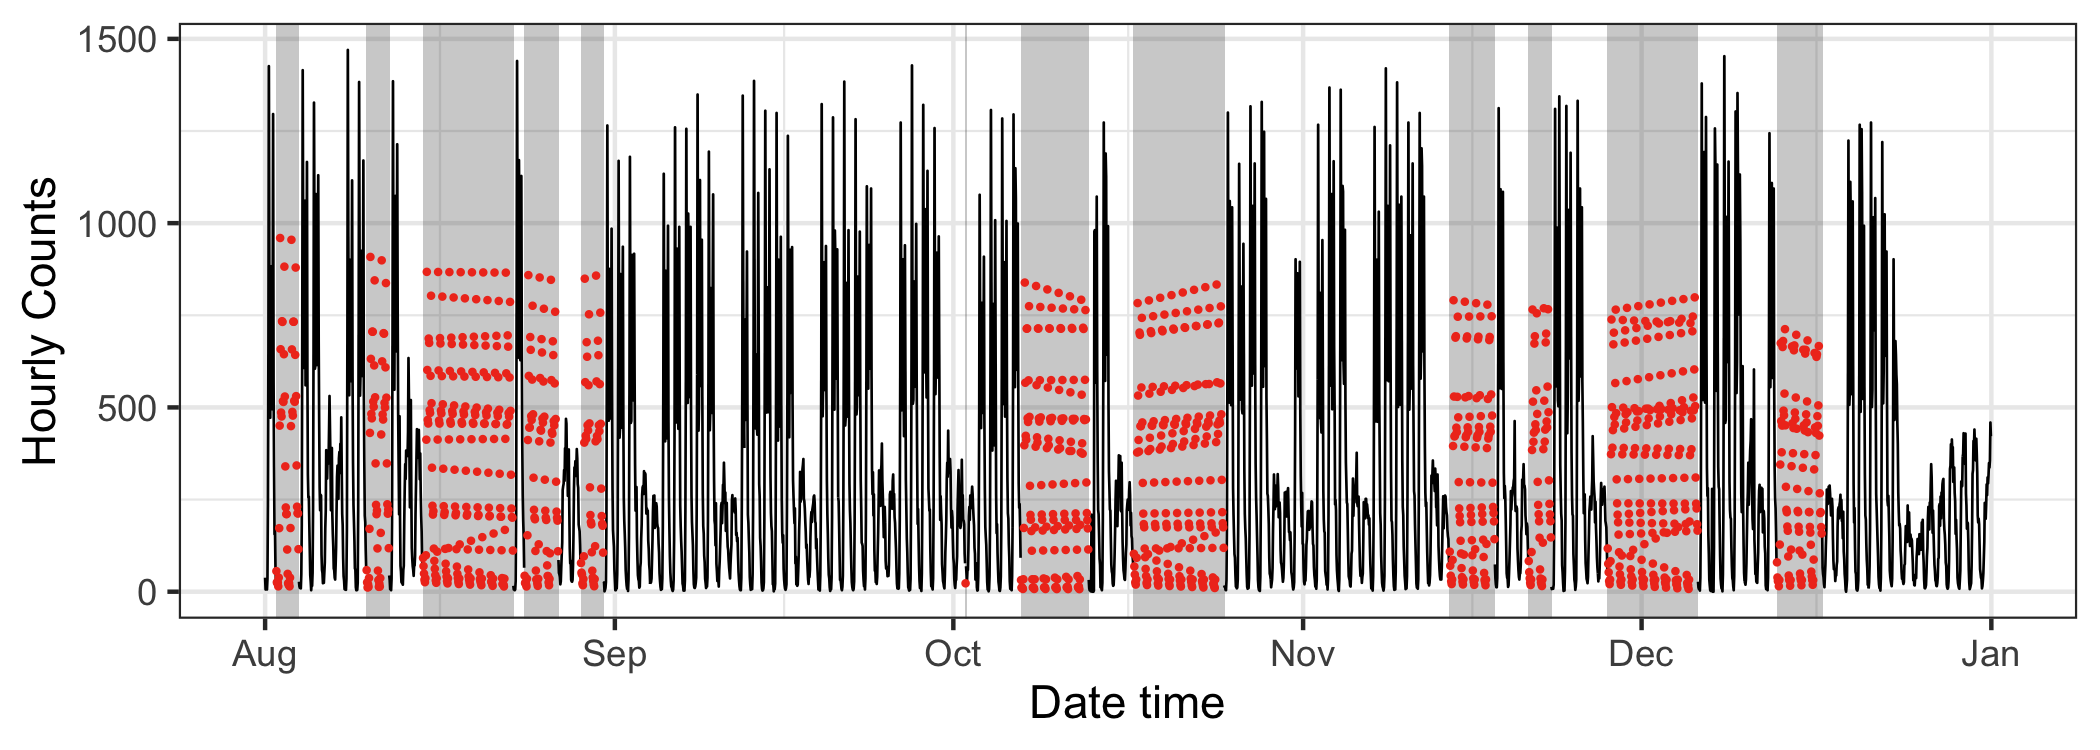 The jailbird with colored imputed data using the seasonal split method for the sensor at Spencer Street from 2016 August to December. Strong seasonal features are prominent in the original data, but it is hard to detect the seasonal pattern from the imputed data.